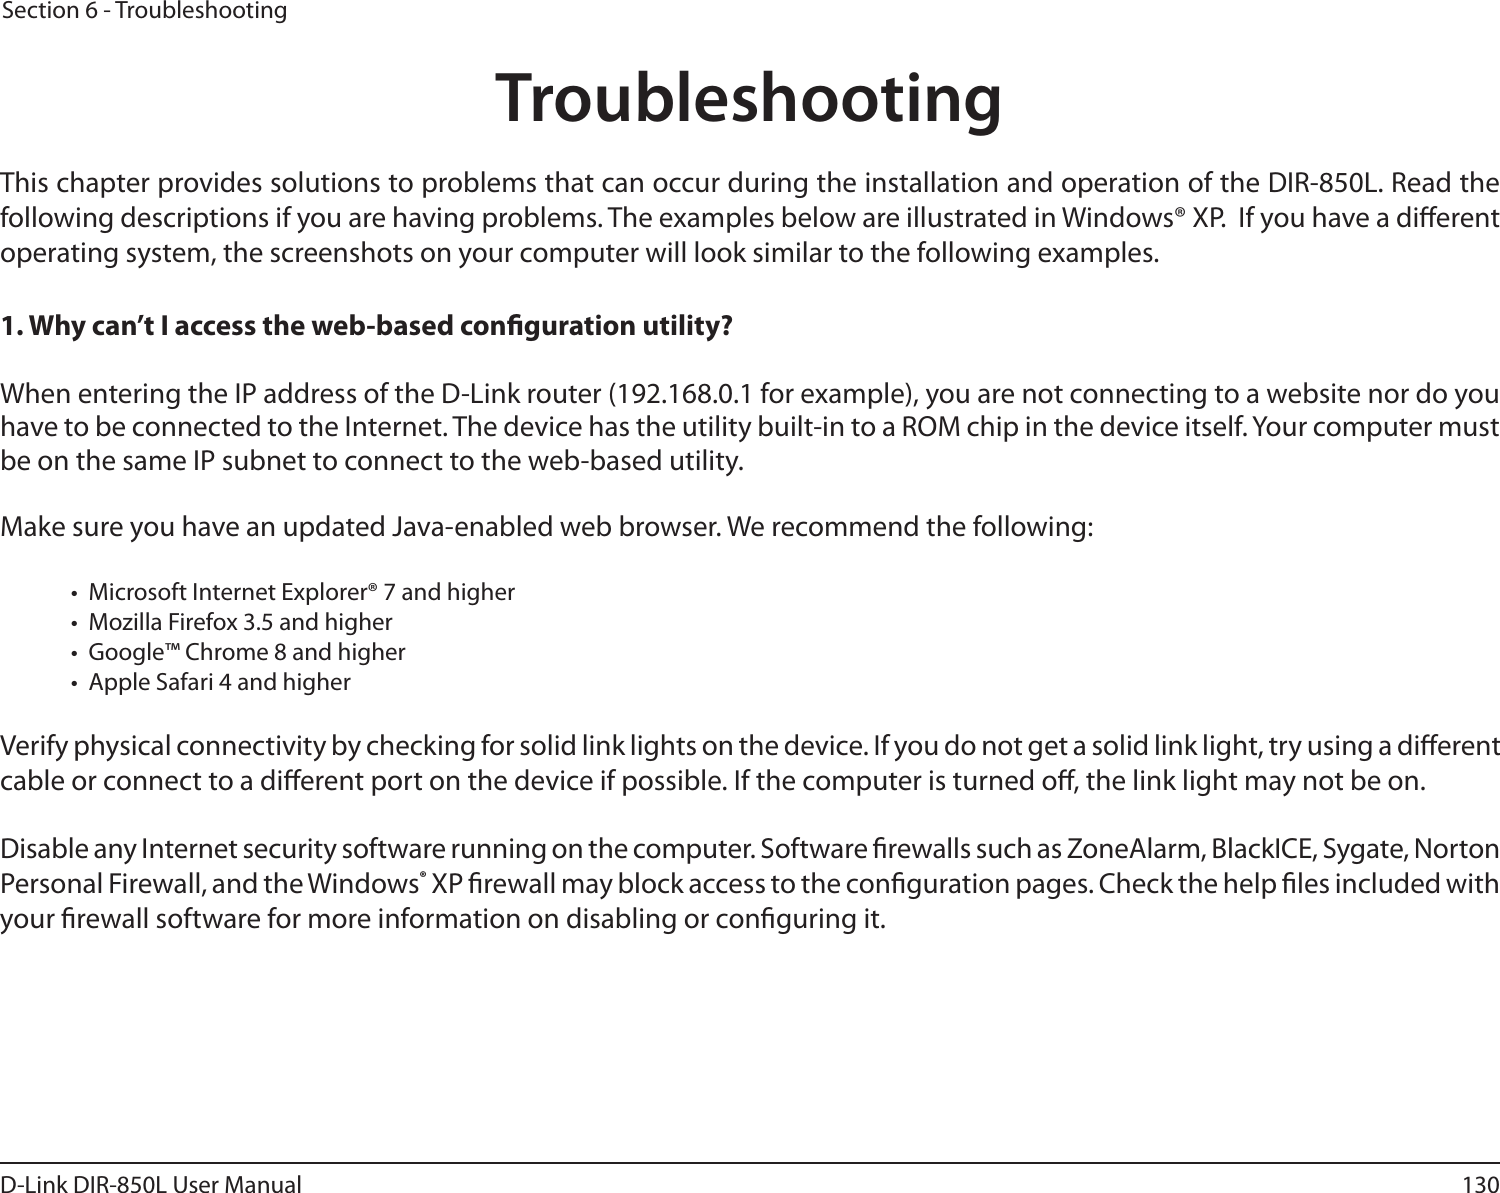 130D-Link DIR-850L User ManualSection 6 - TroubleshootingTroubleshootingThis chapter provides solutions to problems that can occur during the installation and operation of the DIR-850L. Read the following descriptions if you are having problems. The examples below are illustrated in Windows® XP.  If you have a dierent operating system, the screenshots on your computer will look similar to the following examples.1. Why can’t I access the web-based conguration utility?When entering the IP address of the D-Link router (192.168.0.1 for example), you are not connecting to a website nor do you have to be connected to the Internet. The device has the utility built-in to a ROM chip in the device itself. Your computer must be on the same IP subnet to connect to the web-based utility. Make sure you have an updated Java-enabled web browser. We recommend the following:  •  Microsoft Internet Explorer® 7 and higher•  Mozilla Firefox 3.5 and higher•  Google™ Chrome 8 and higher•  Apple Safari 4 and higherVerify physical connectivity by checking for solid link lights on the device. If you do not get a solid link light, try using a dierent cable or connect to a dierent port on the device if possible. If the computer is turned o, the link light may not be on.Disable any Internet security software running on the computer. Software rewalls such as ZoneAlarm, BlackICE, Sygate, Norton Personal Firewall, and the Windows® XP rewall may block access to the conguration pages. Check the help les included with your rewall software for more information on disabling or conguring it.